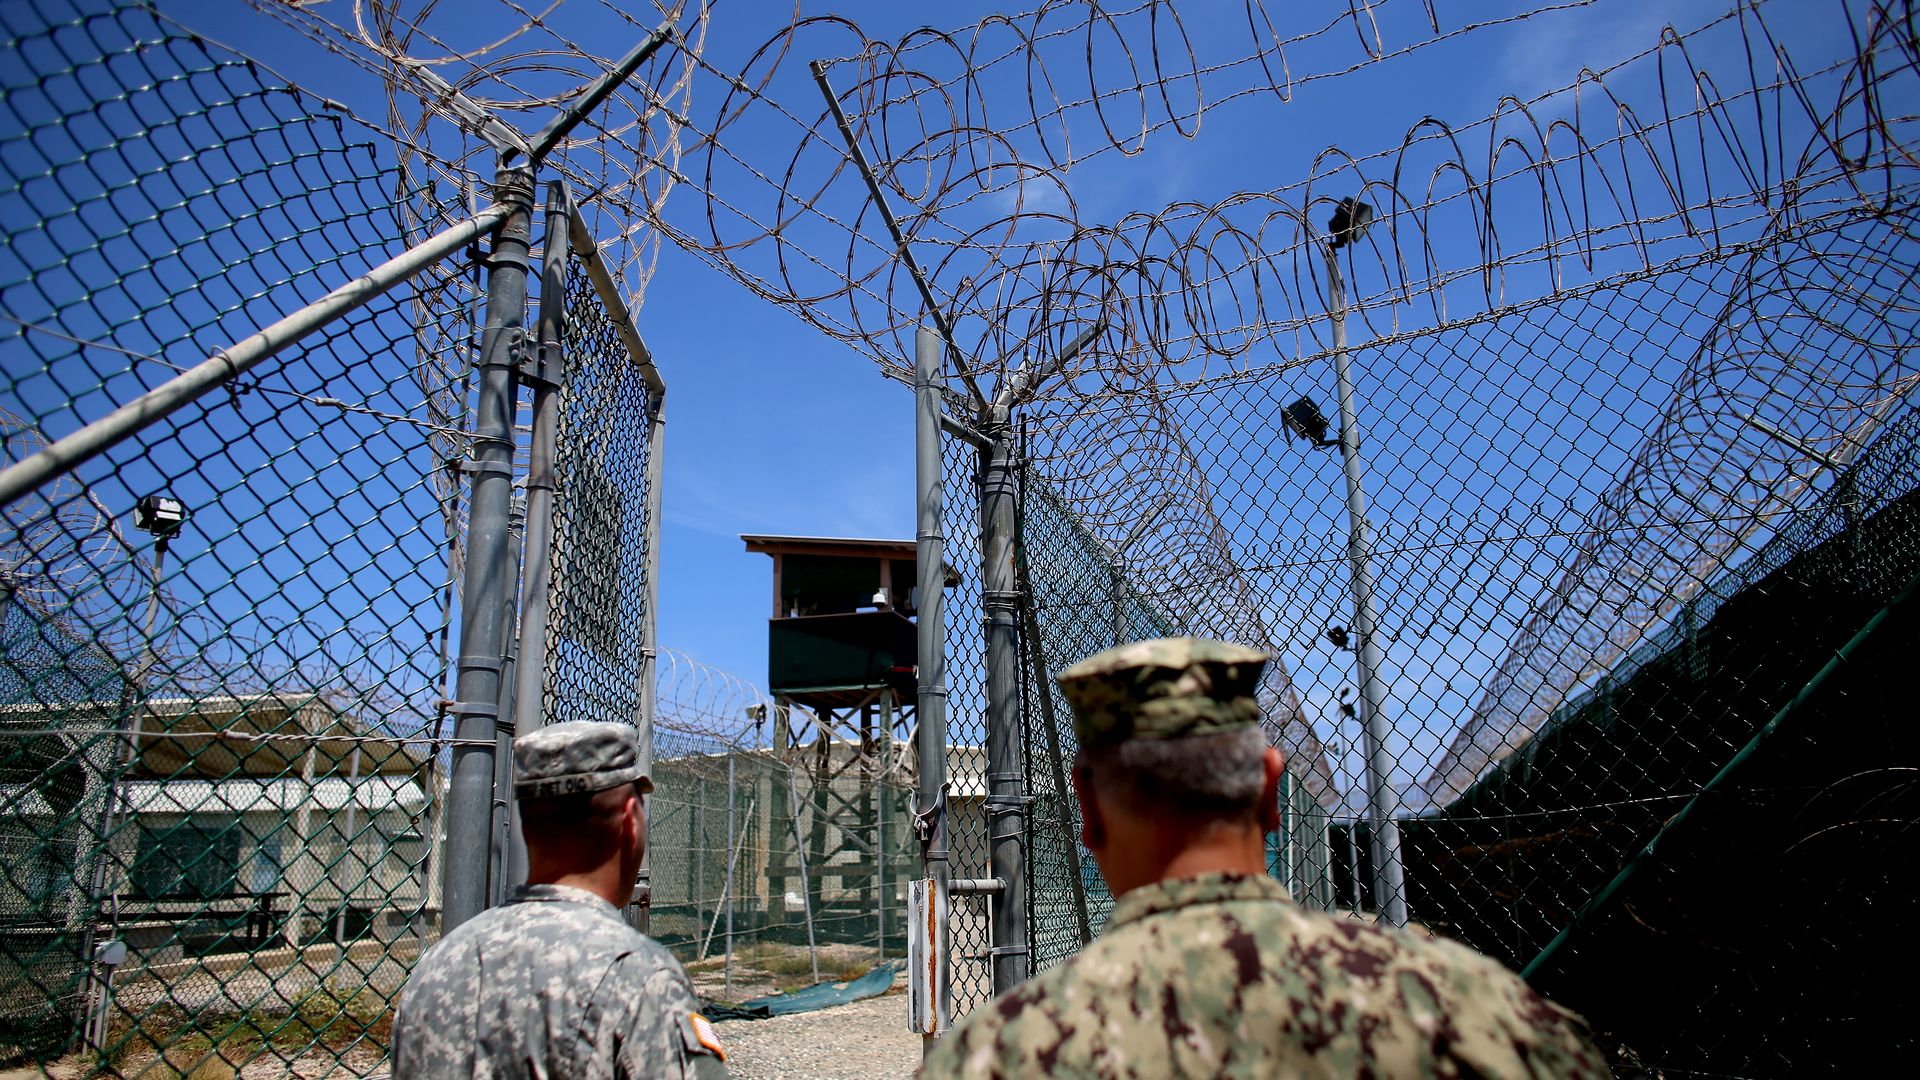 Camp Delta, part of the U.S. military prison for 'enemy combatants' on June 26, 2013 in Guantanamo Bay, Cuba. 